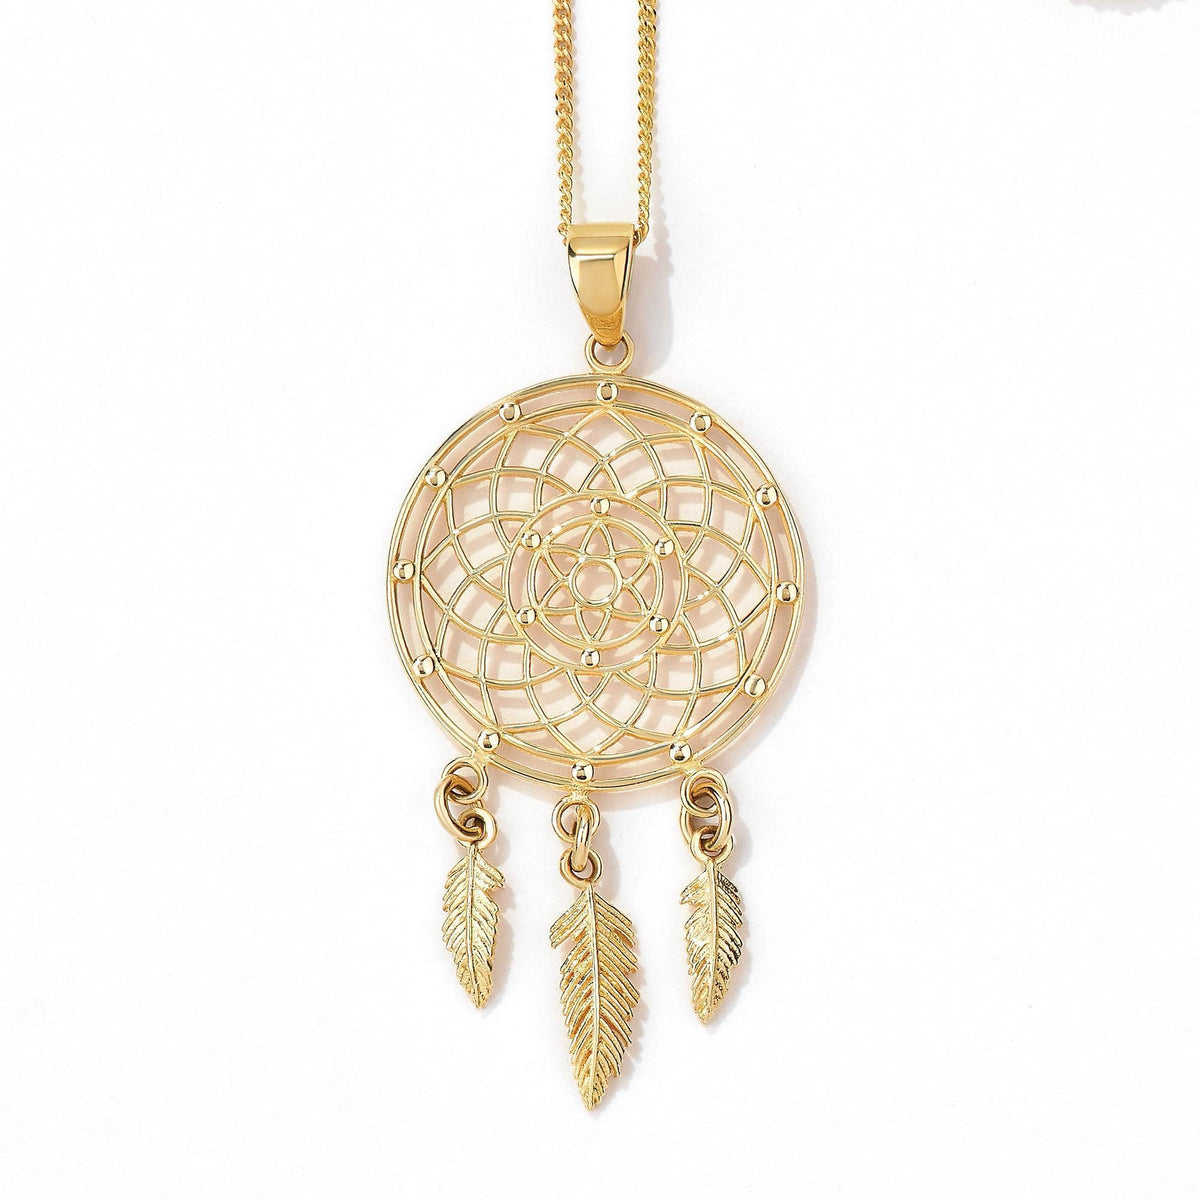 Buy Dream Catcher Necklace Sterling Silver Women Luck Necklace Gift for Her  Gold Plated Dreamcatcher Pendant Rose Gold Handmade Jewelry Online in India  - Etsy